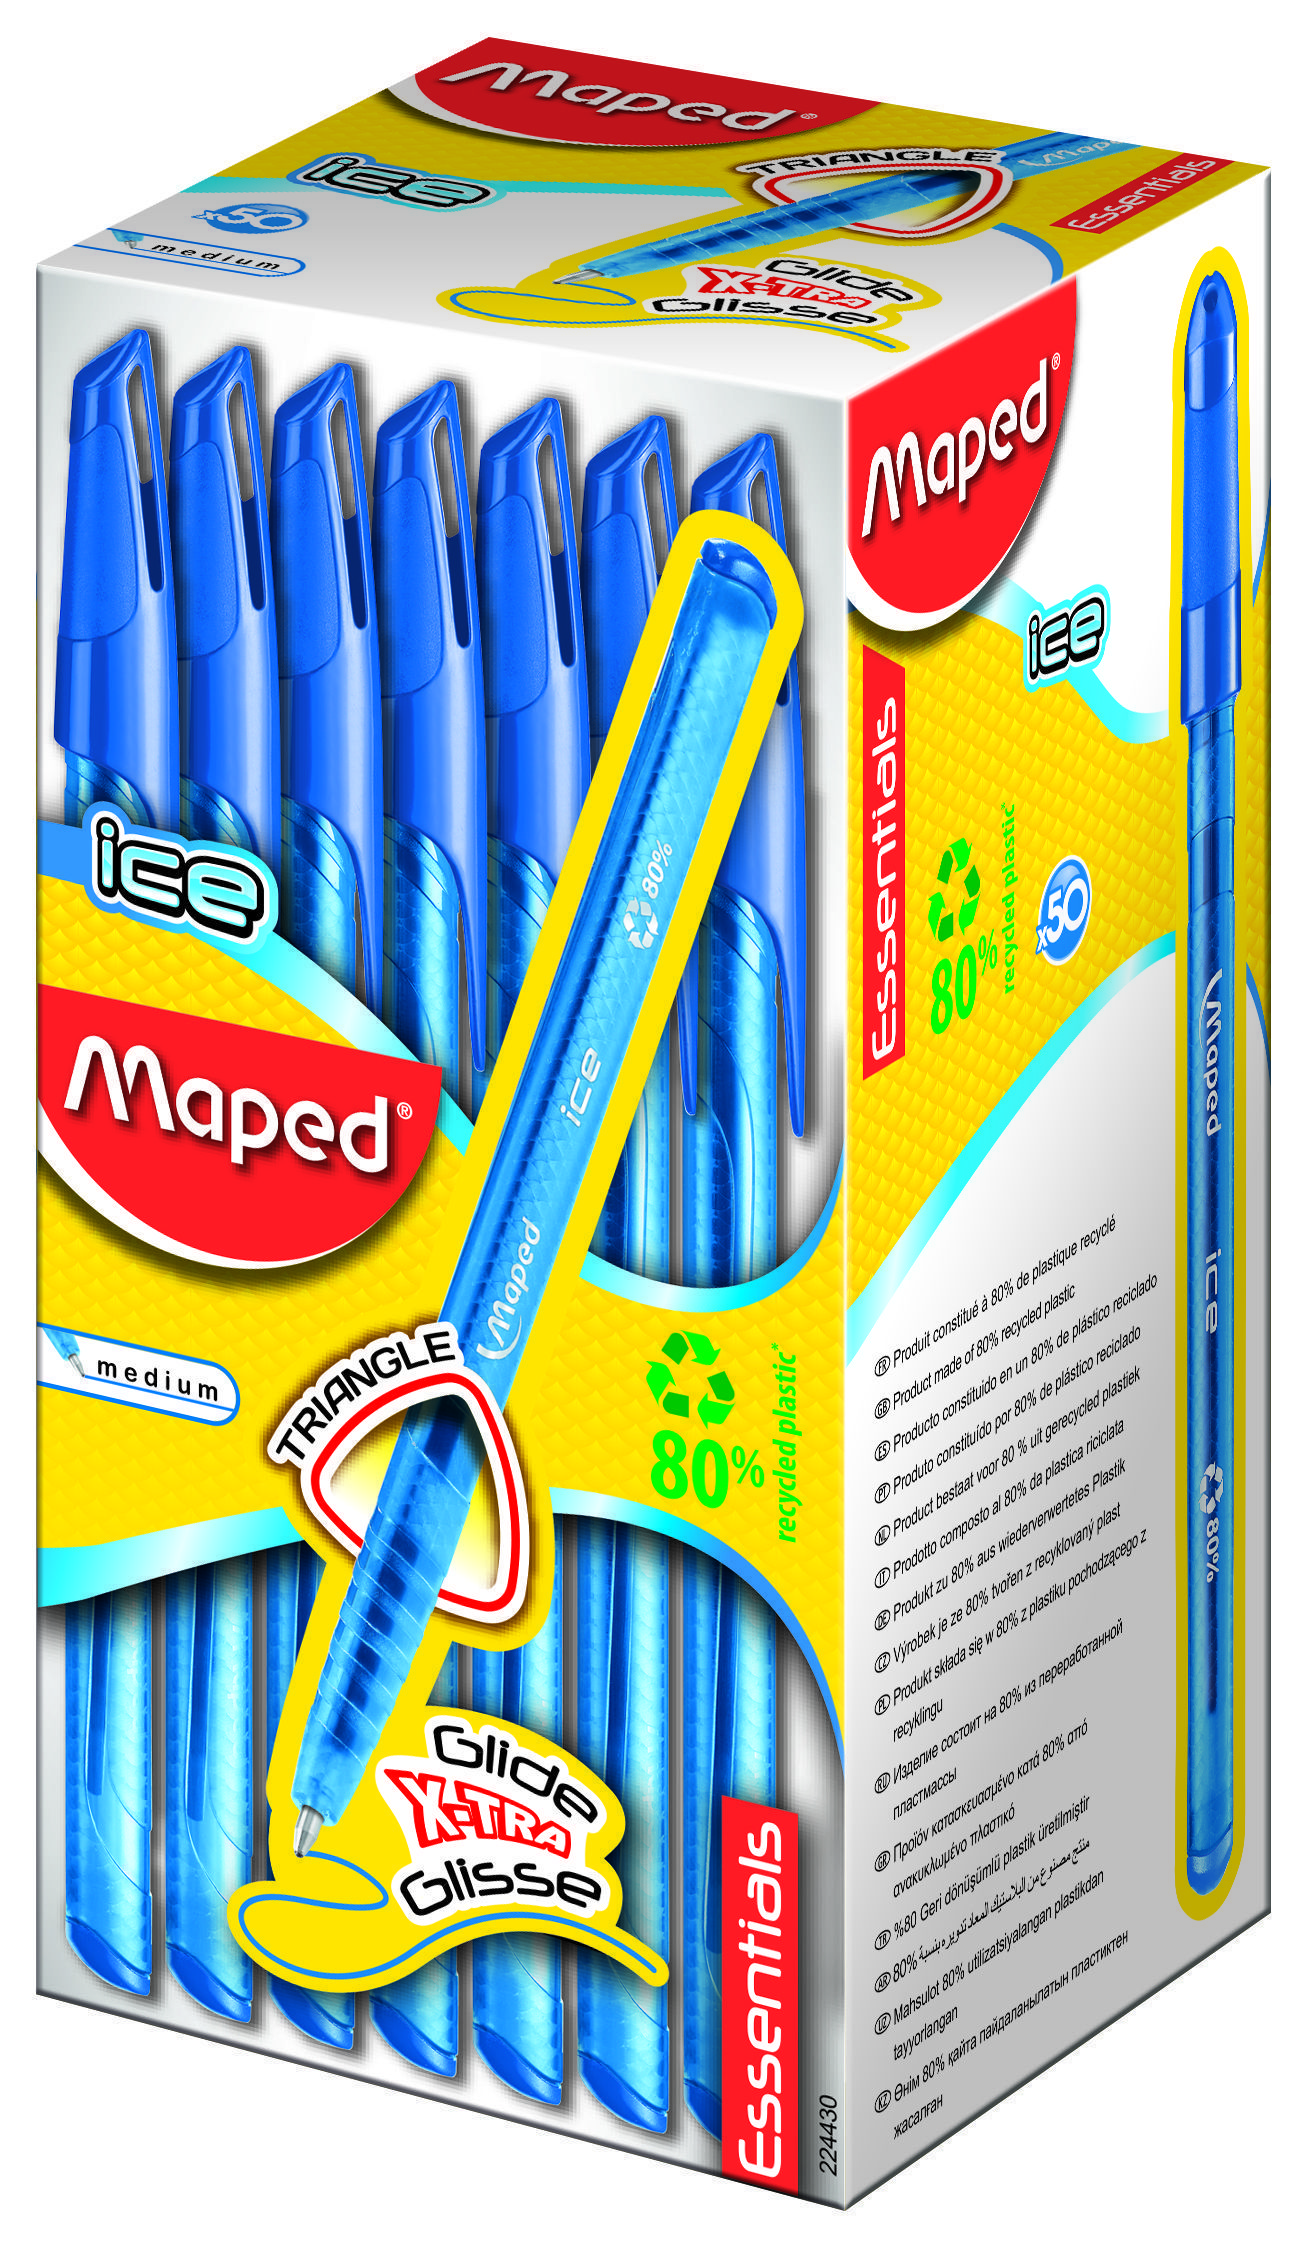   MAPED GREEN ICE,  ,    - 0,6,       ,  